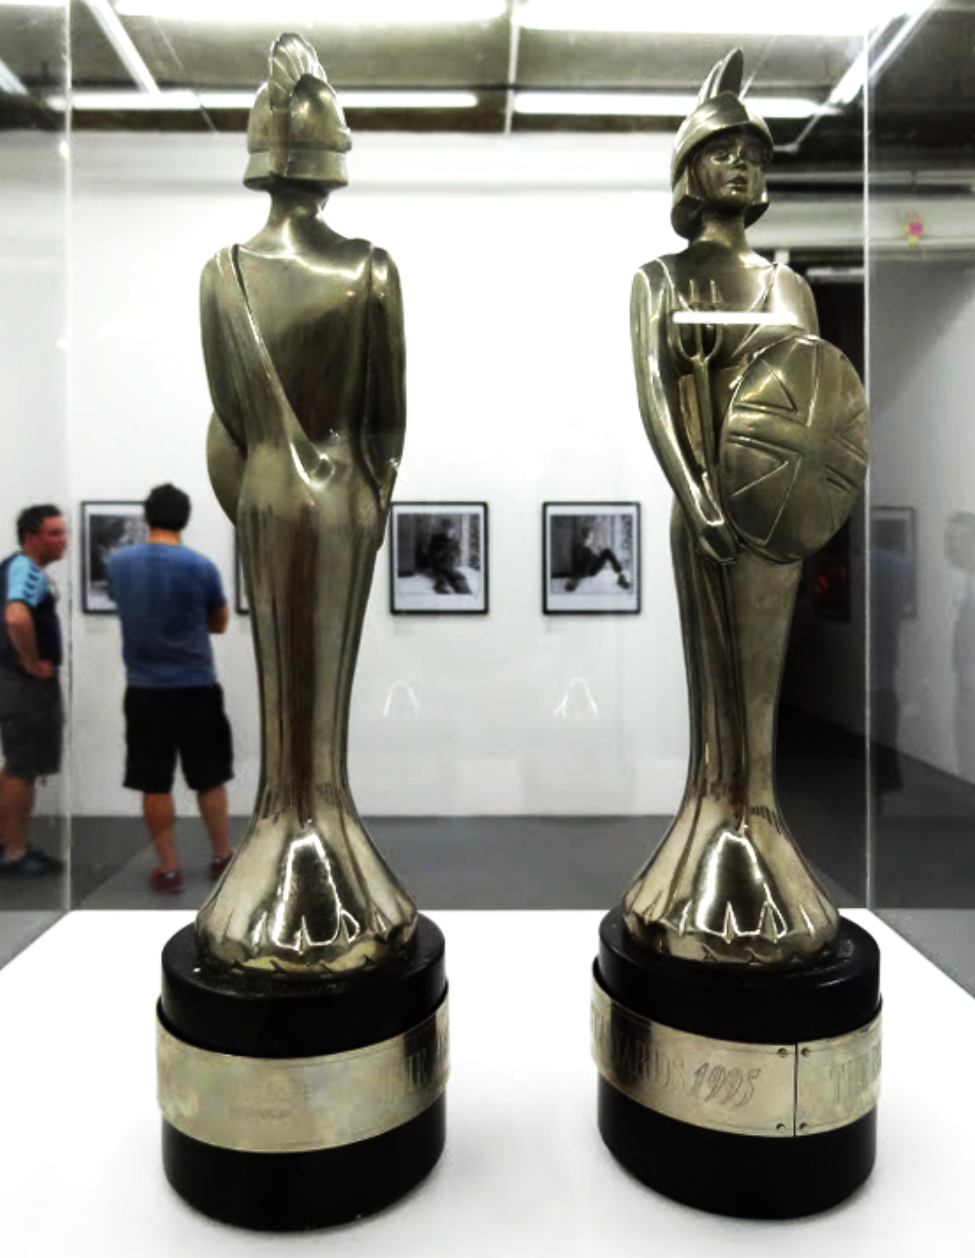 Pictured is two Brit Awards that the band previously won in a glass case, in front of the exhibition wall.